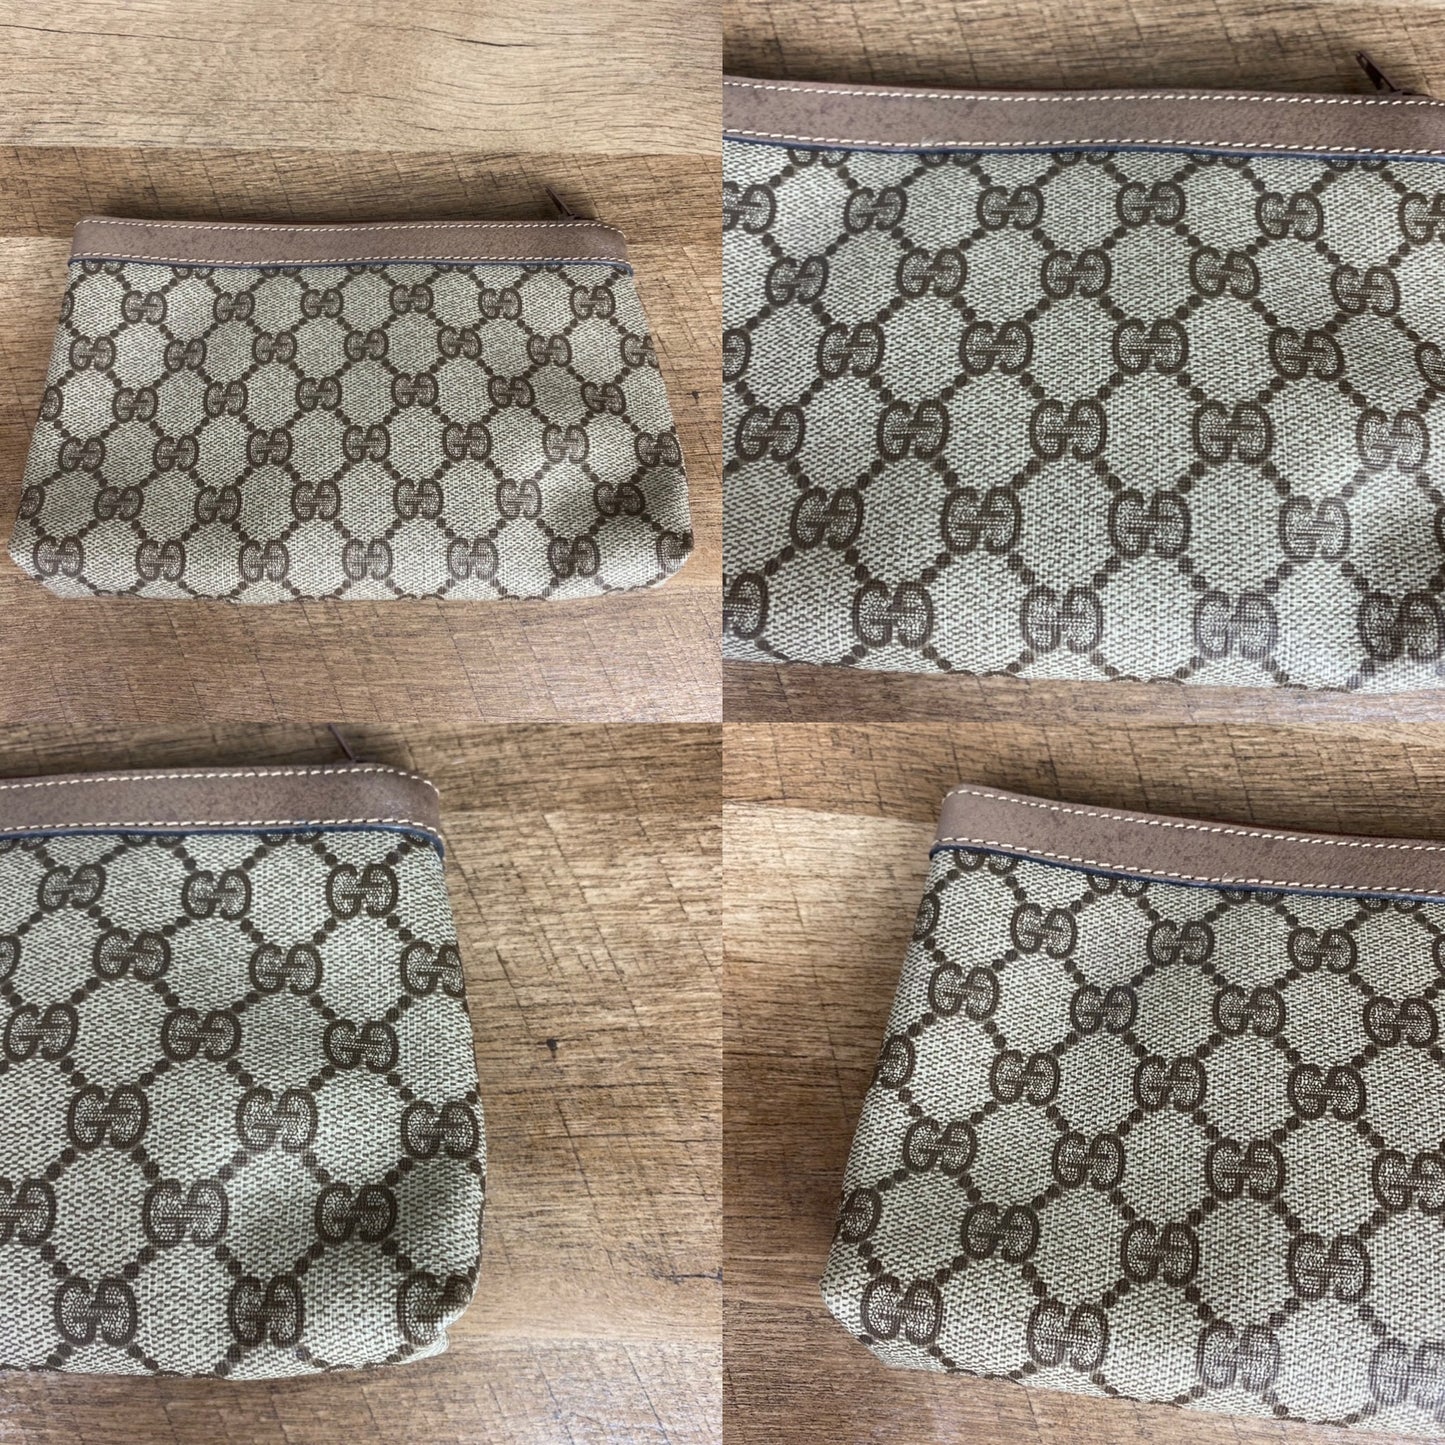 Gucci 1970s Vintage Monogram Cosmetic Pouch